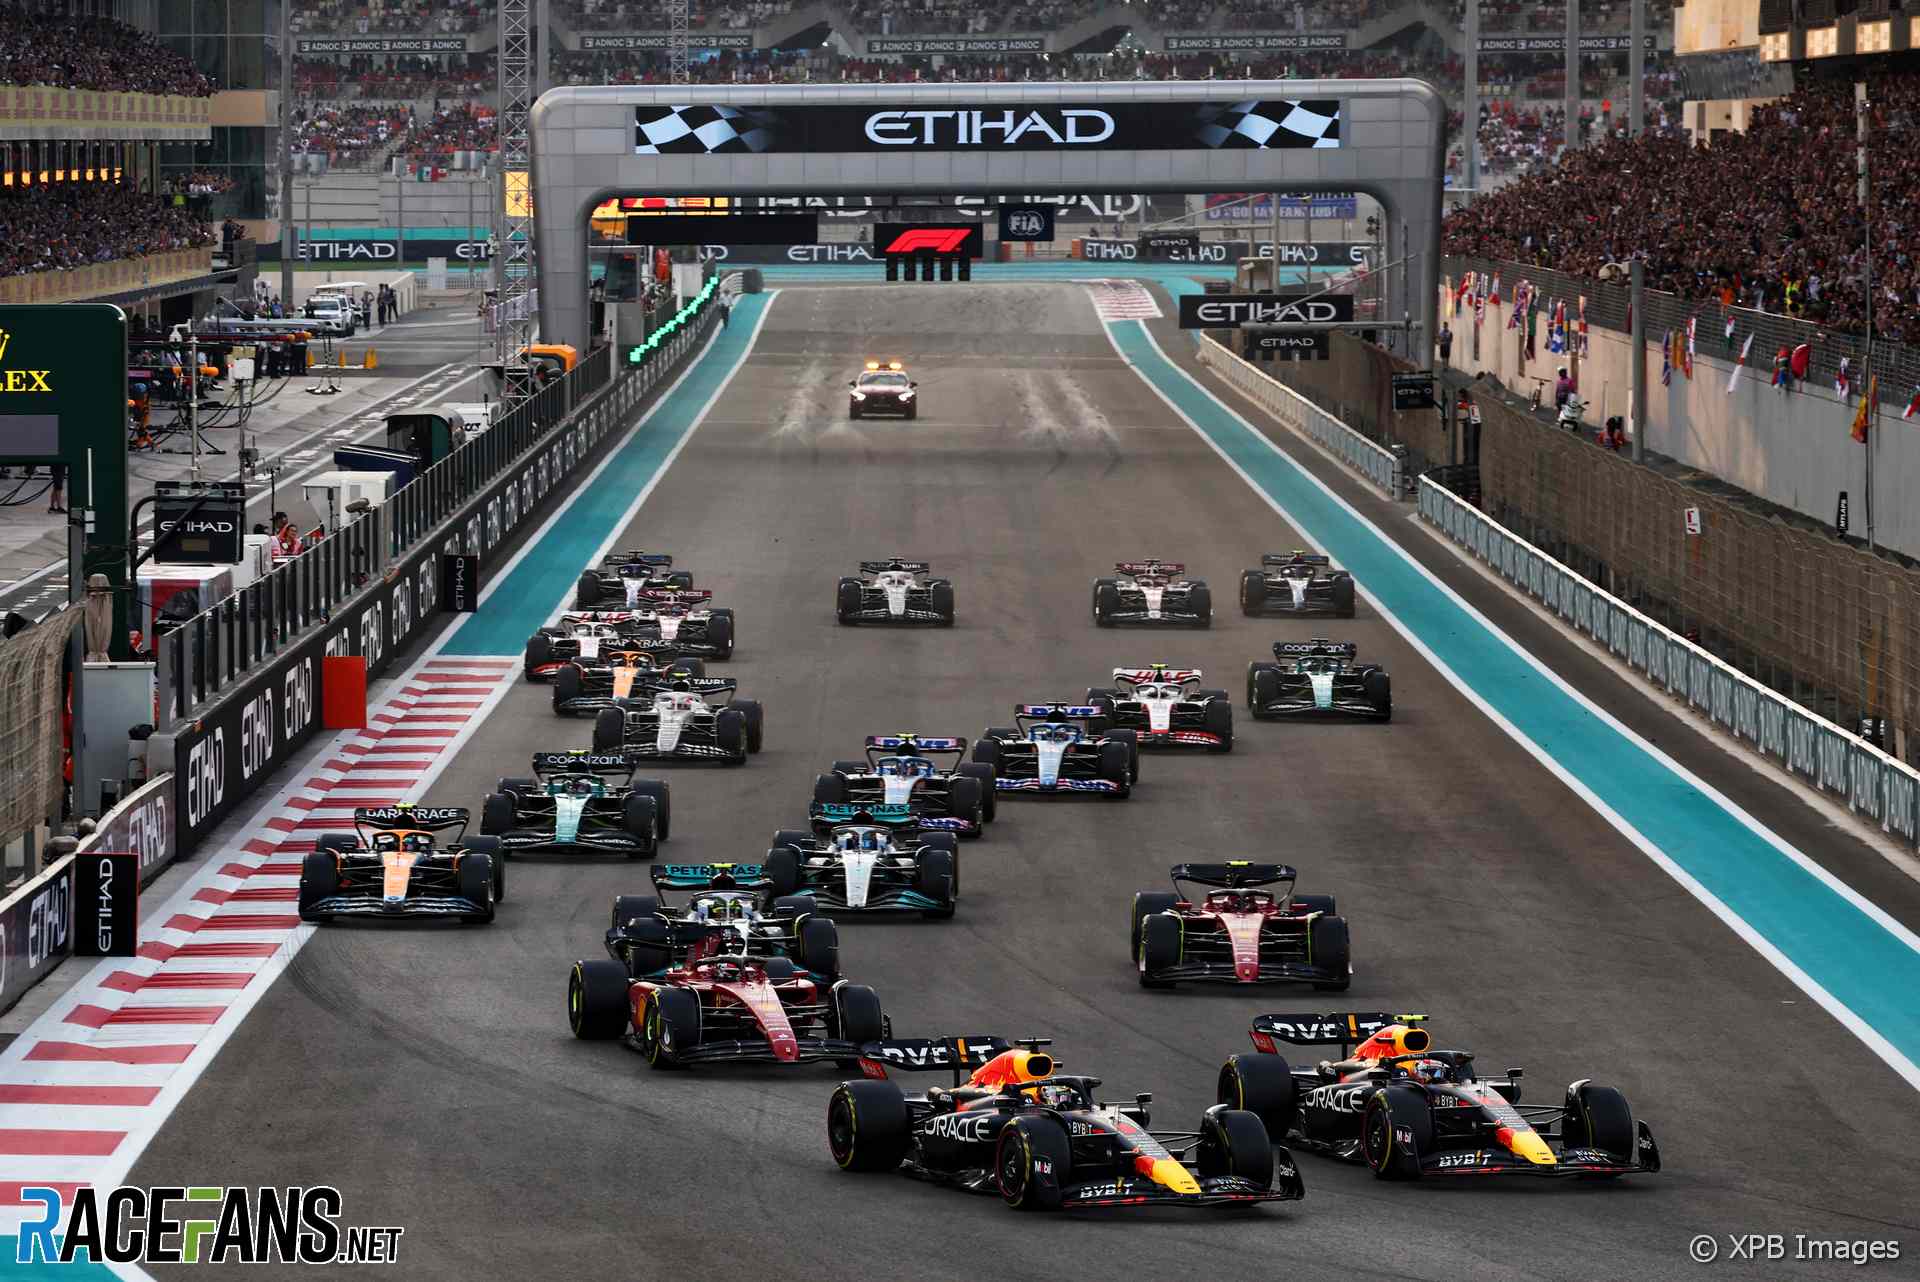 The 2022 Abu Dhabi Grand Prix was held at Yas Marina and won by Max Verstappen